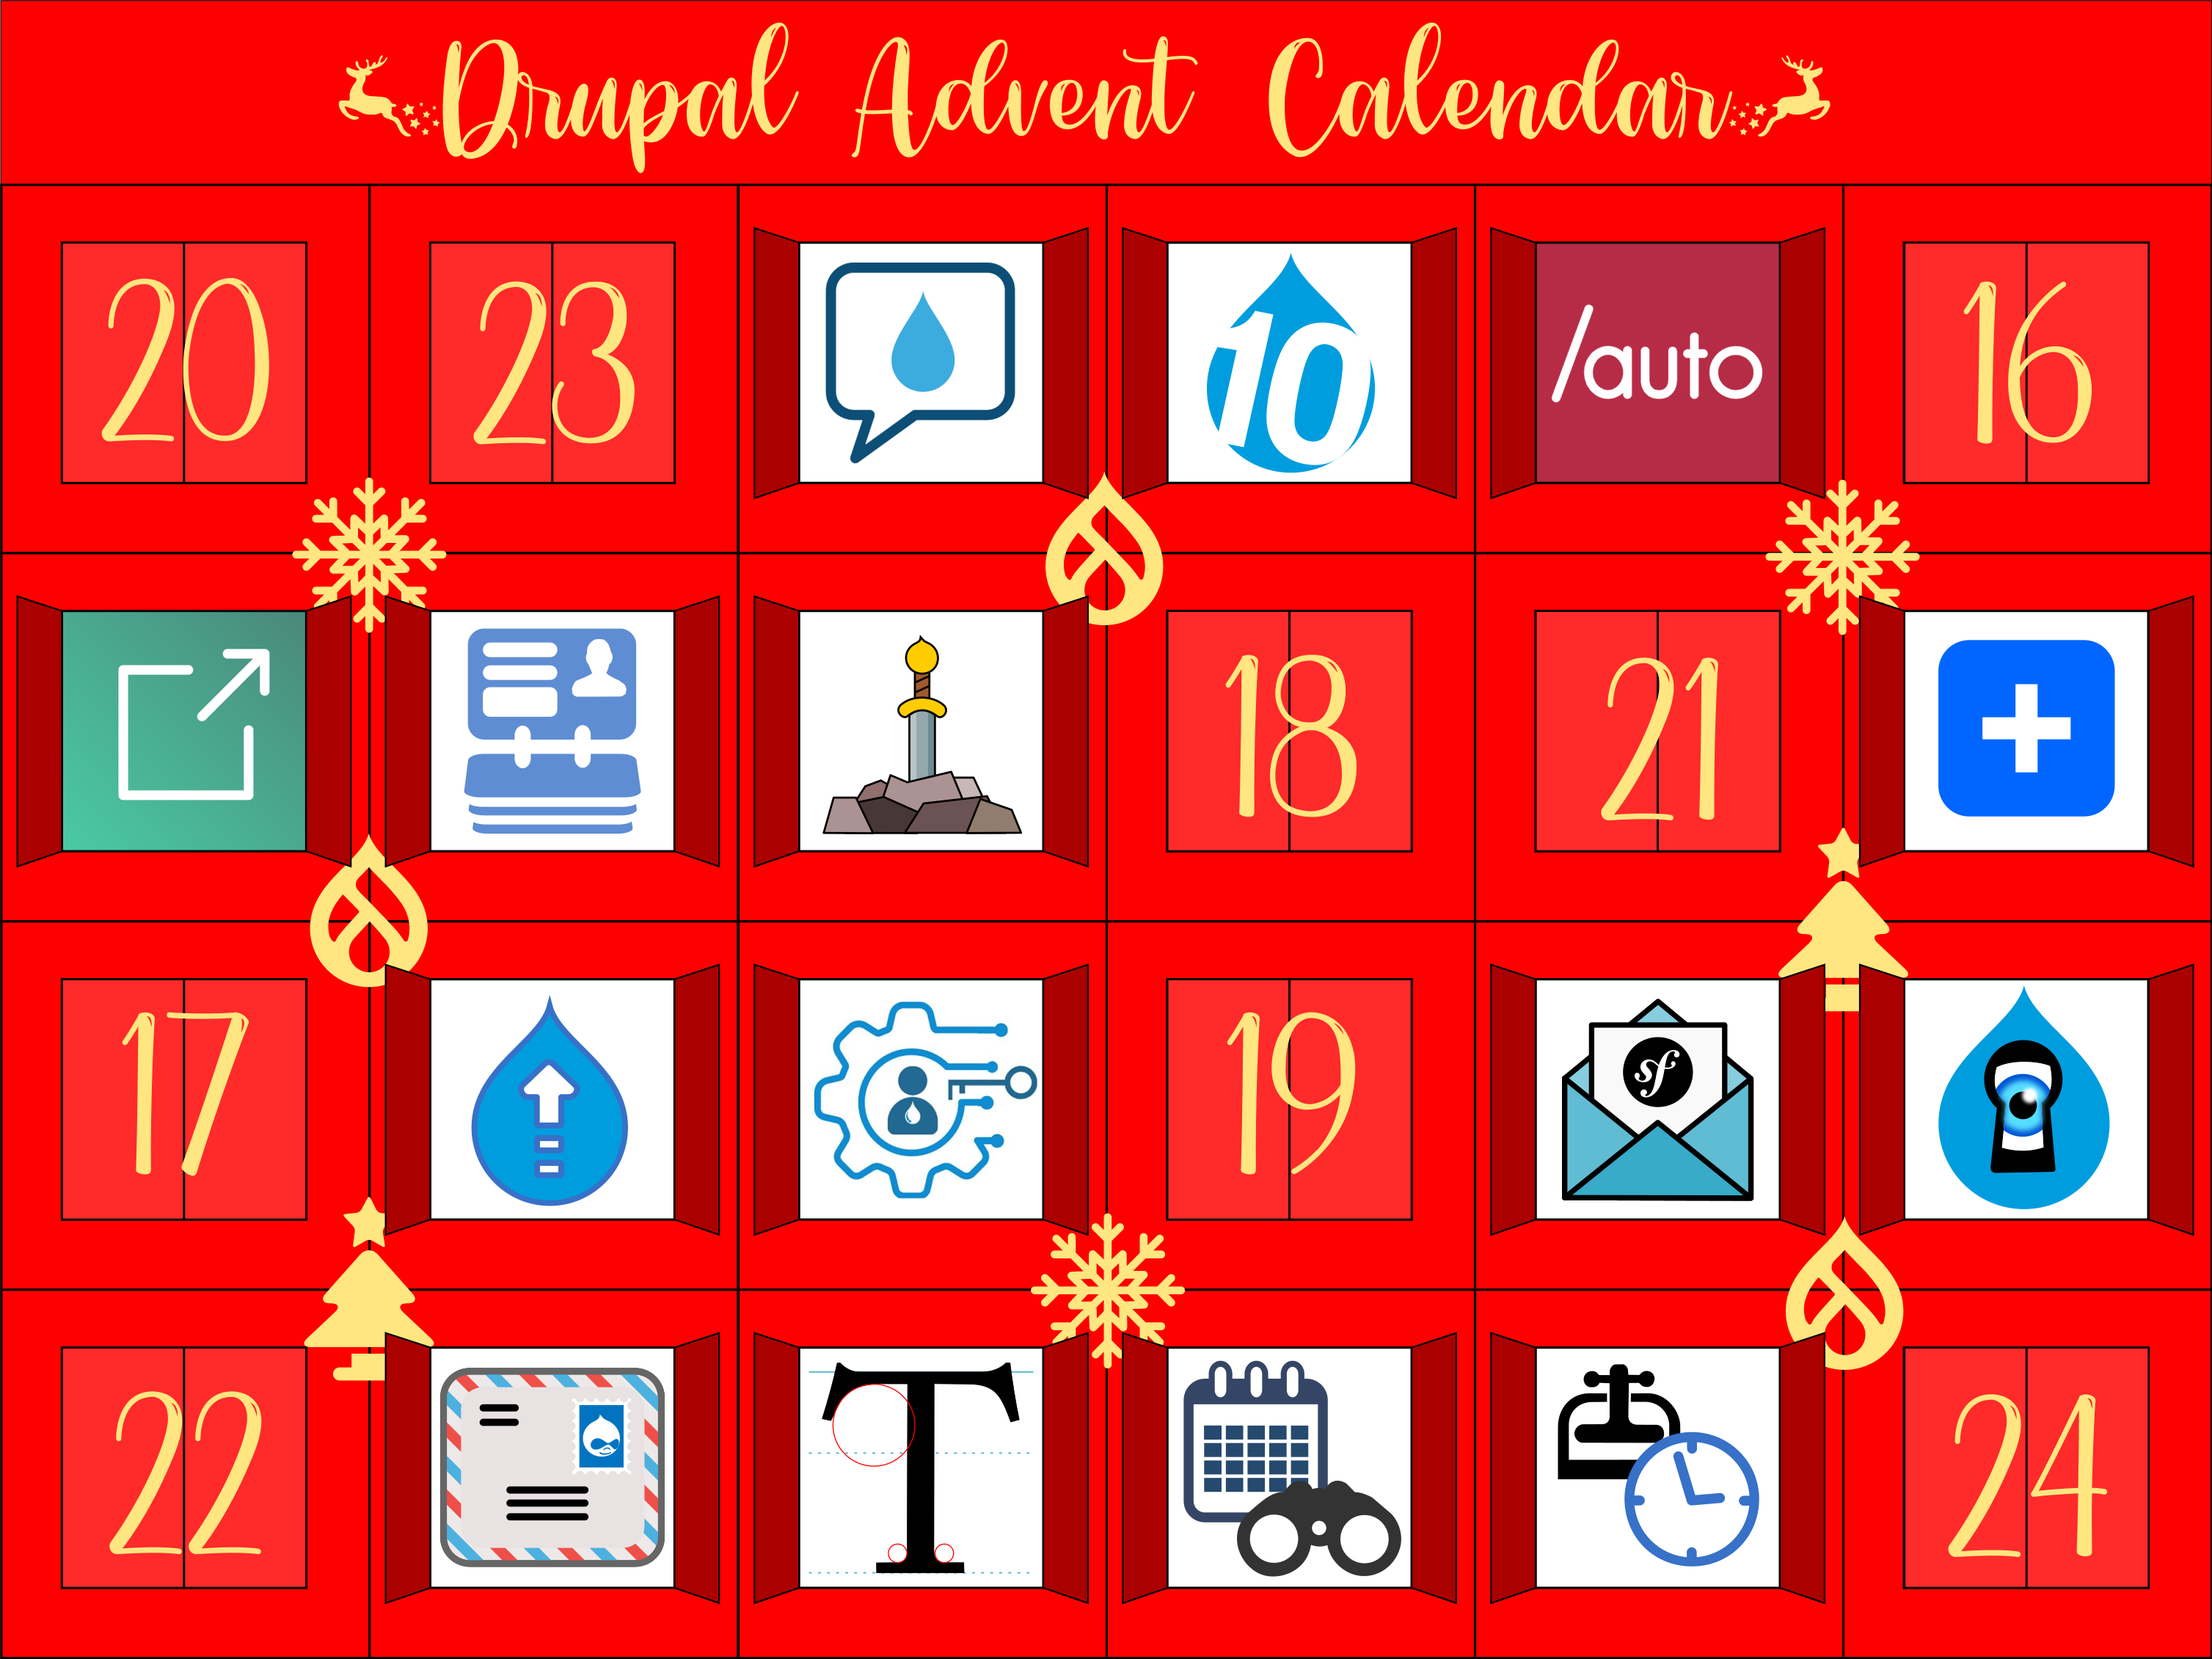 Advent Calendar with door 15 open, revealing a T with typographic marks